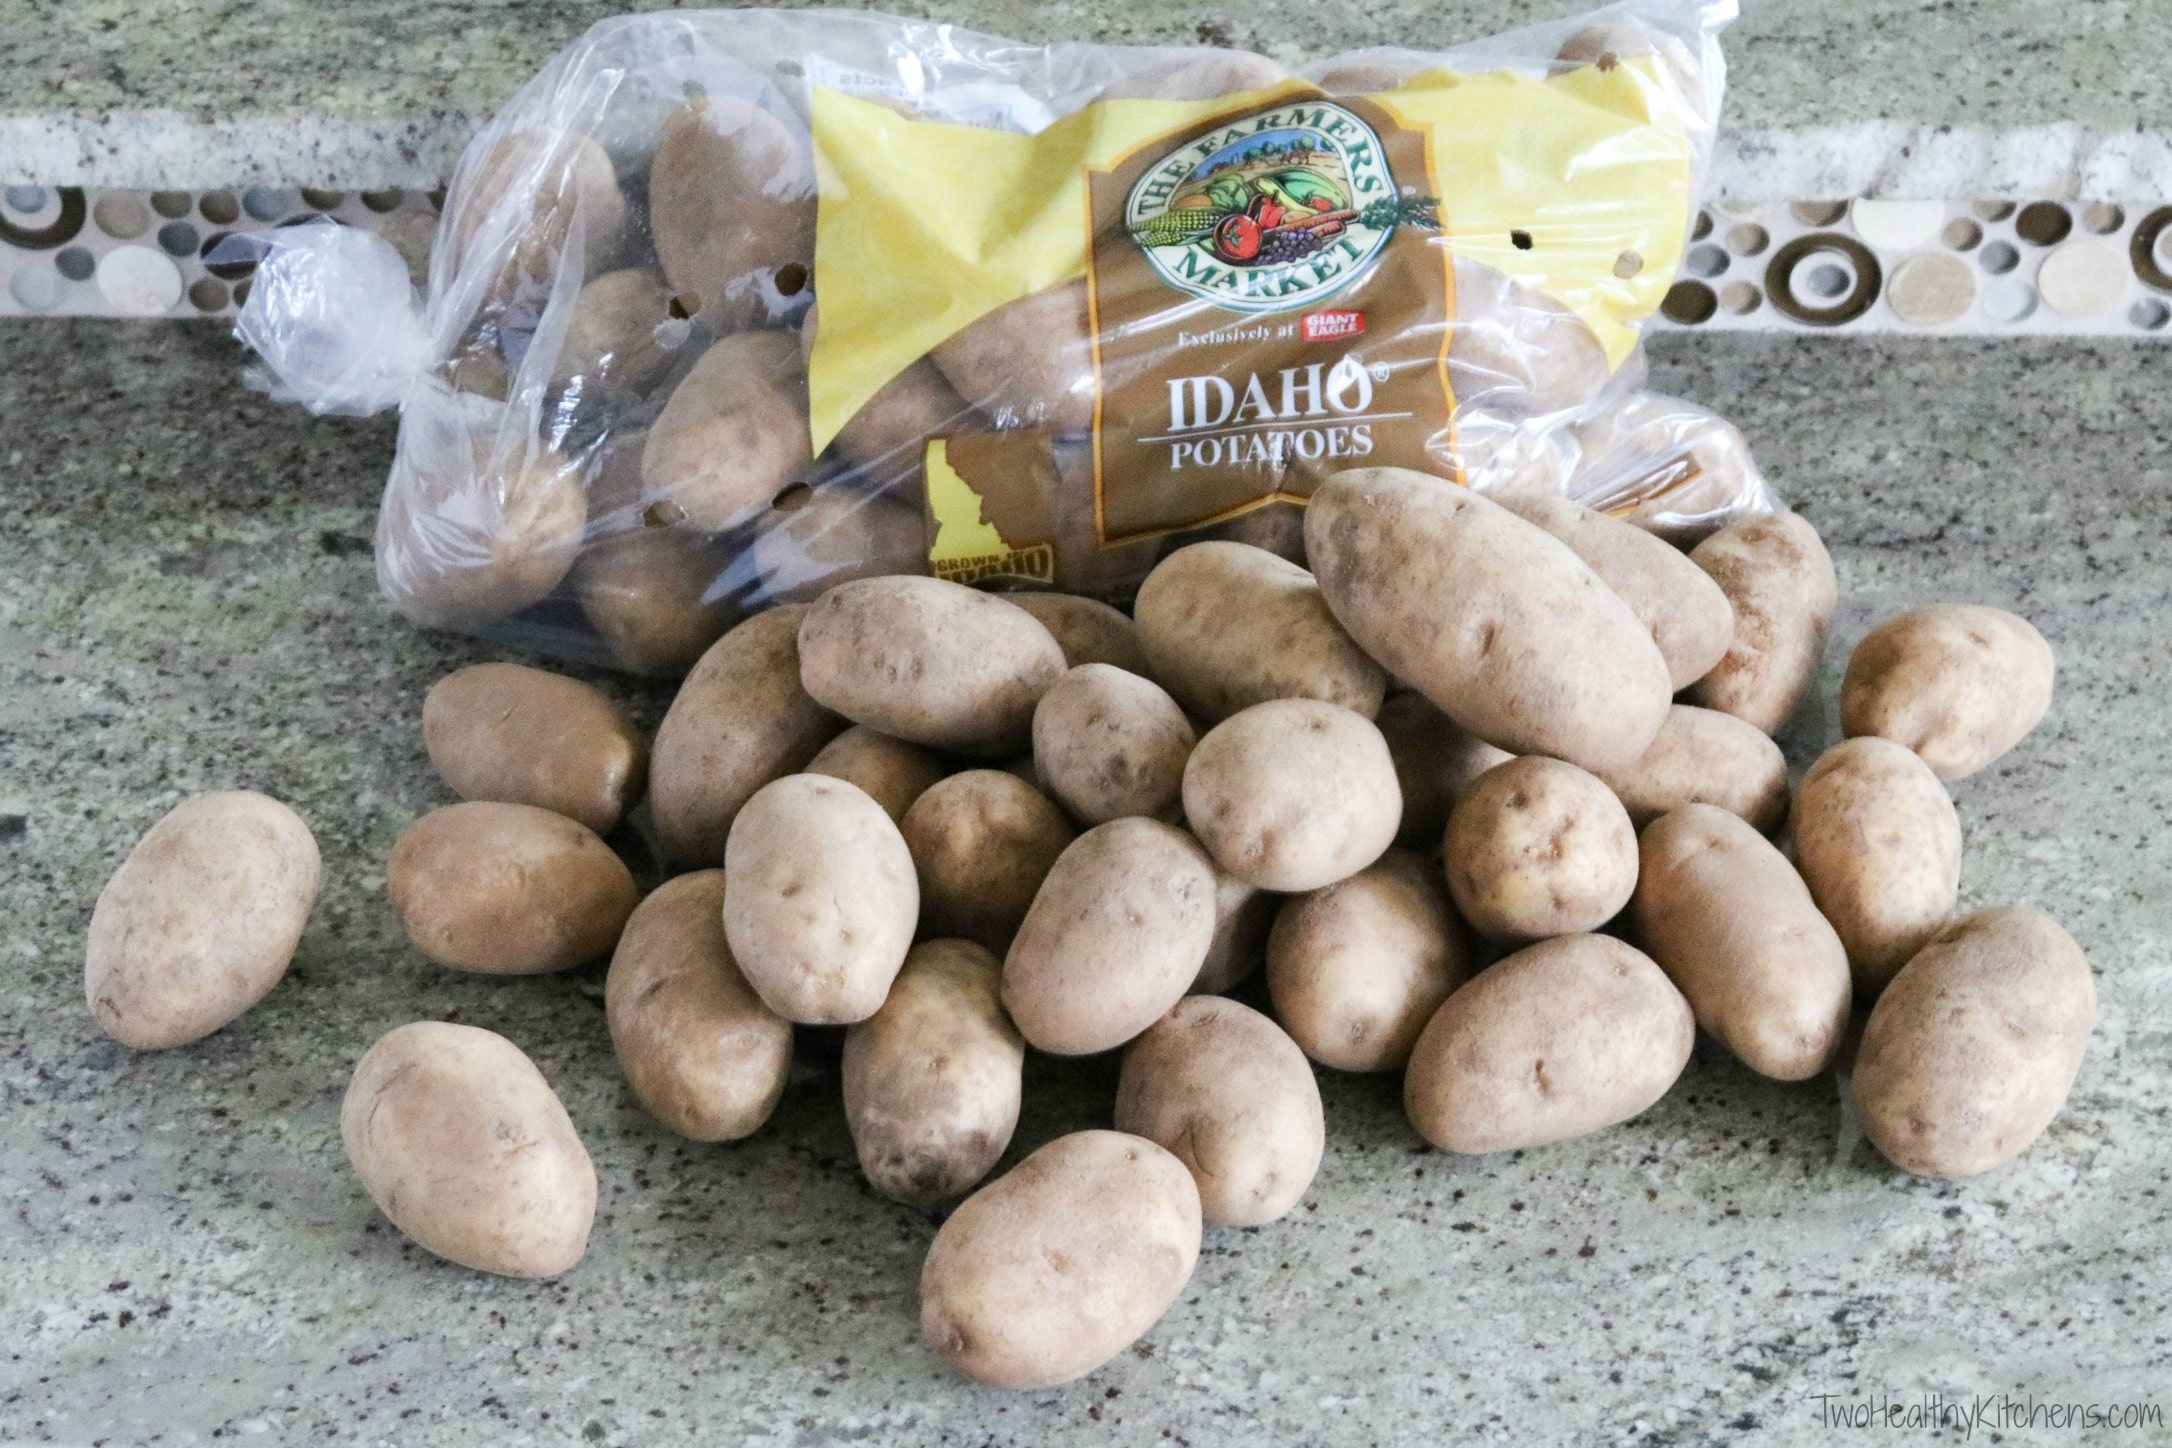 Big bag of russet potatoes on kitchen counter with huge pile of loose potatoes stacked in front of it.